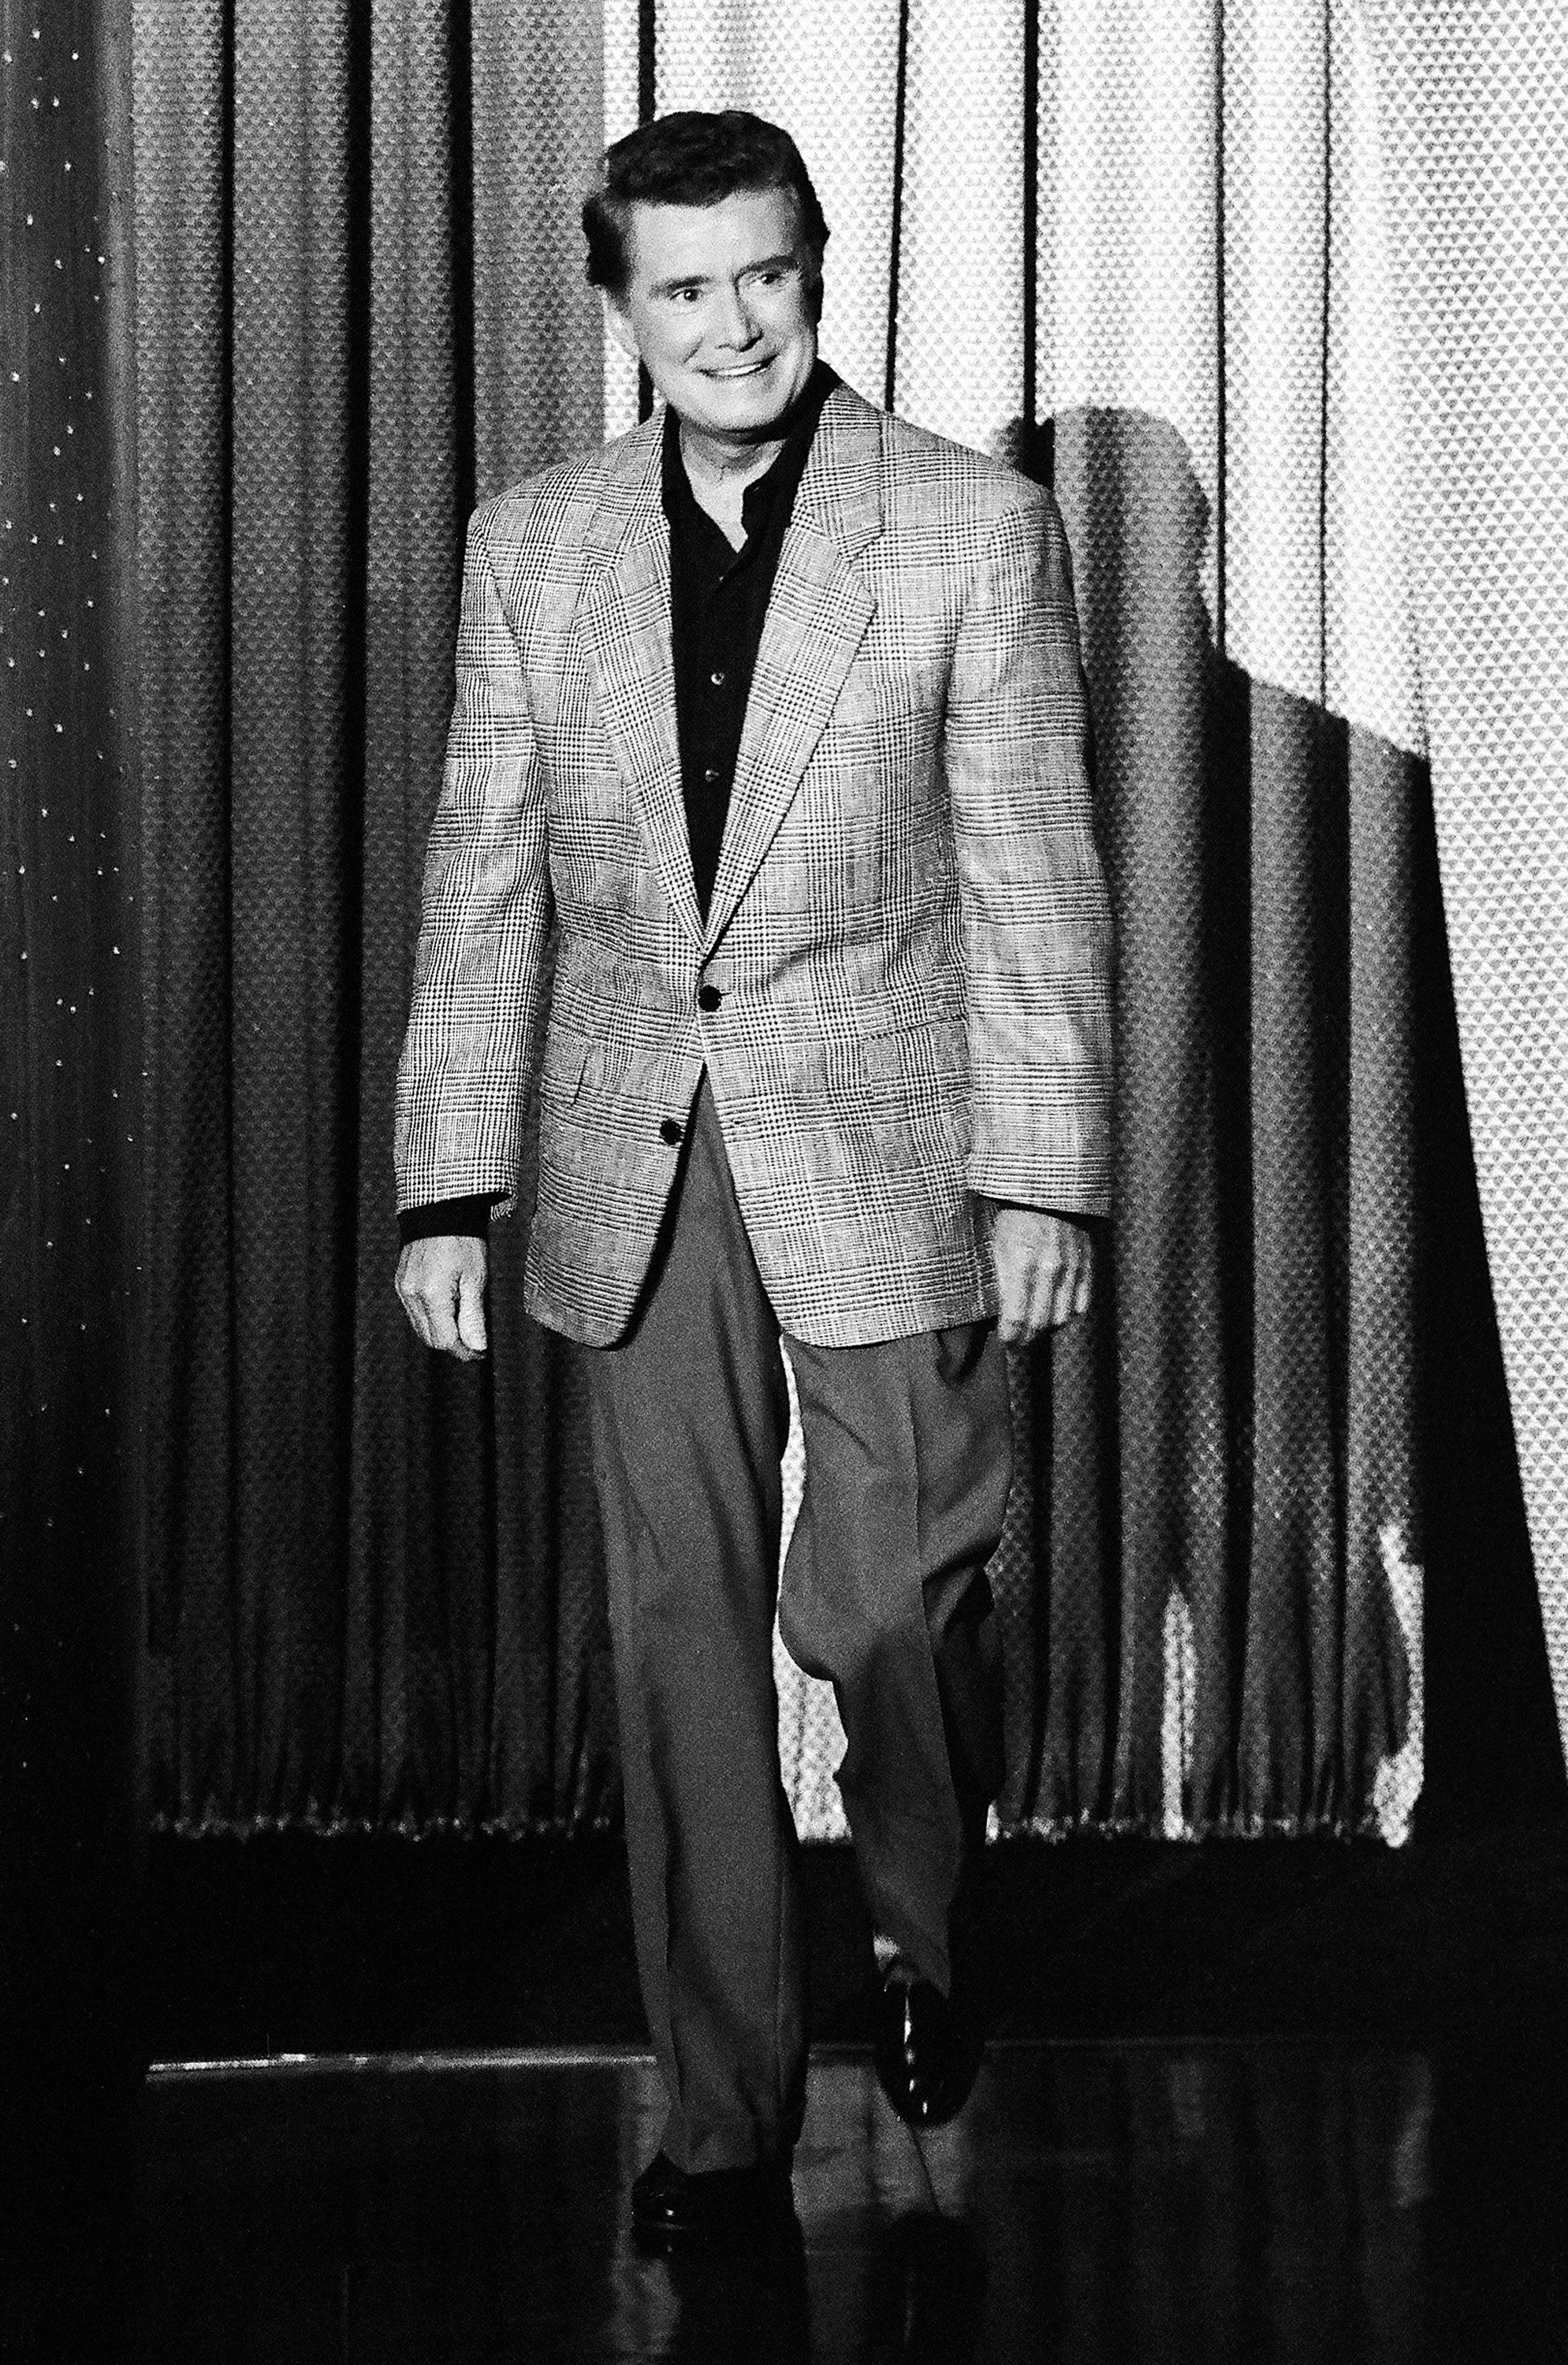 Regis Philbin arriving "The Tonight Show Starring Johnny Carson" on September 19, 1990 | Source: Getty Images